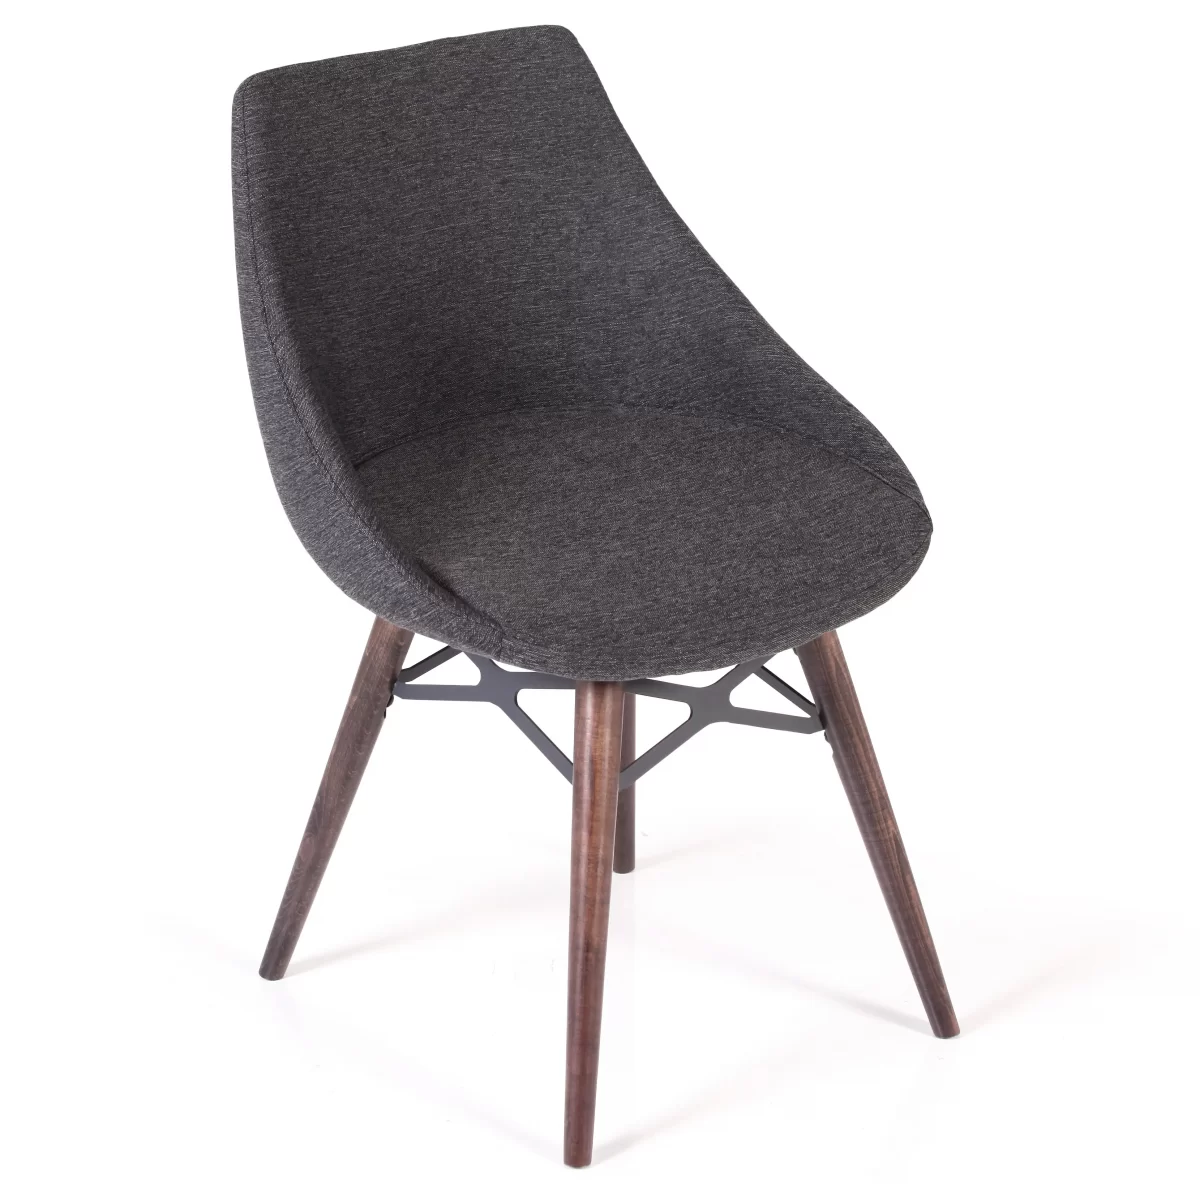 Jory Office Cafe Chair scaled